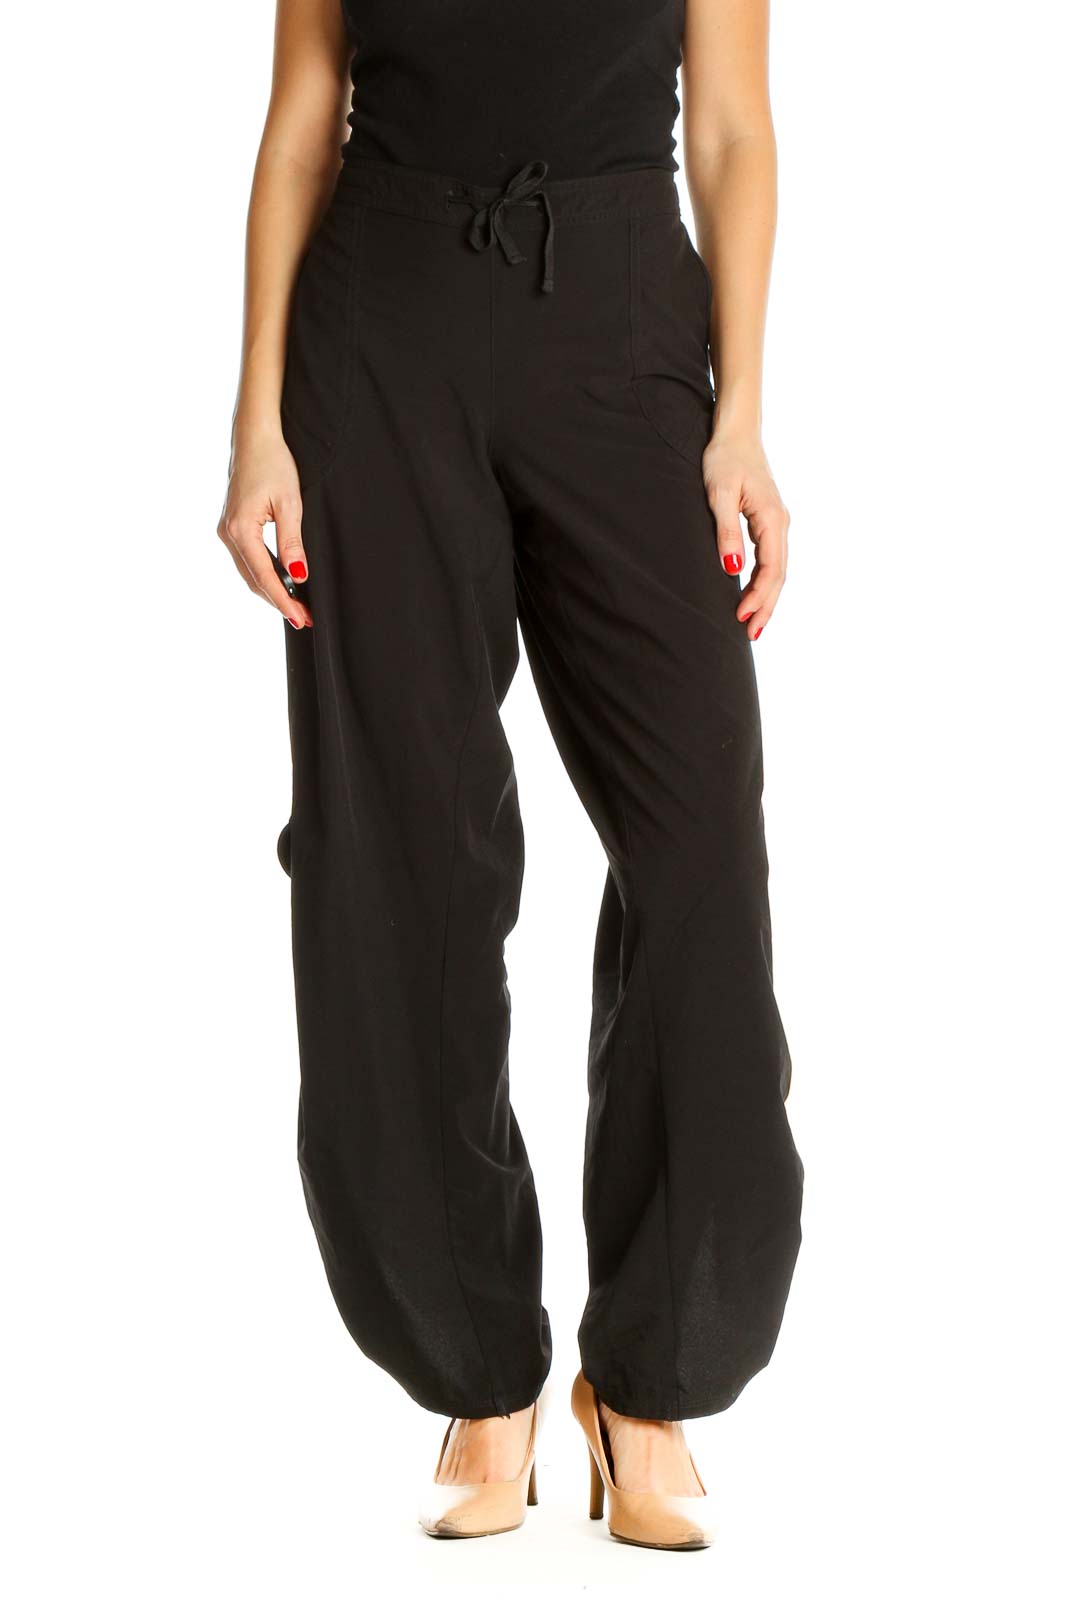 Black Solid All Day Wear Trousers Front